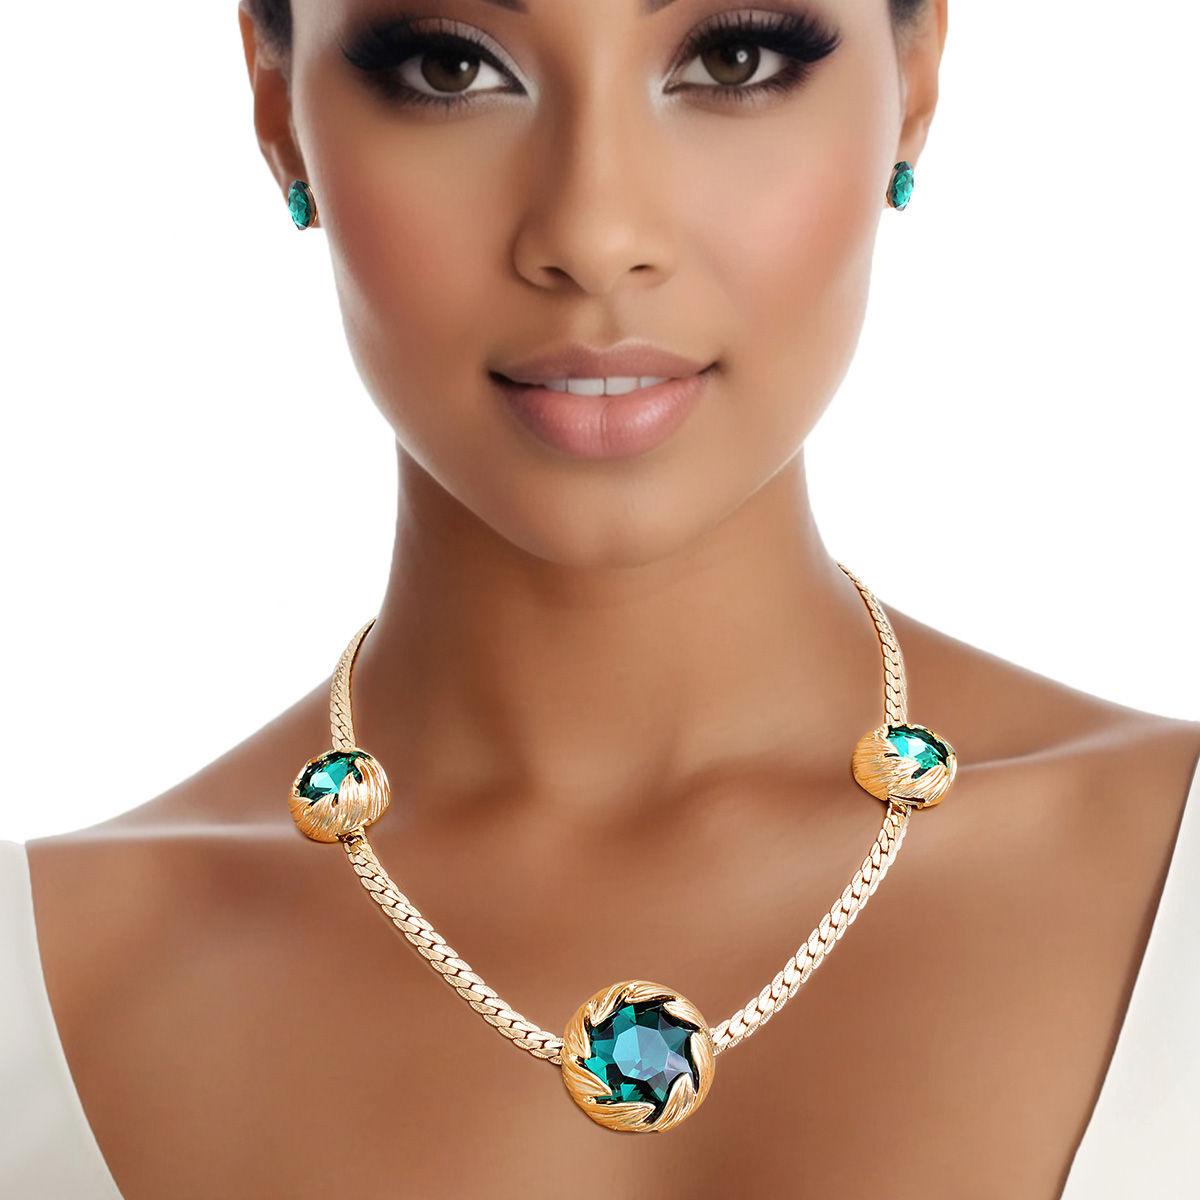 Necklace and Stud Earrings Set: Gold-Toned Triple Leaf Wrap Design with Green Crystal